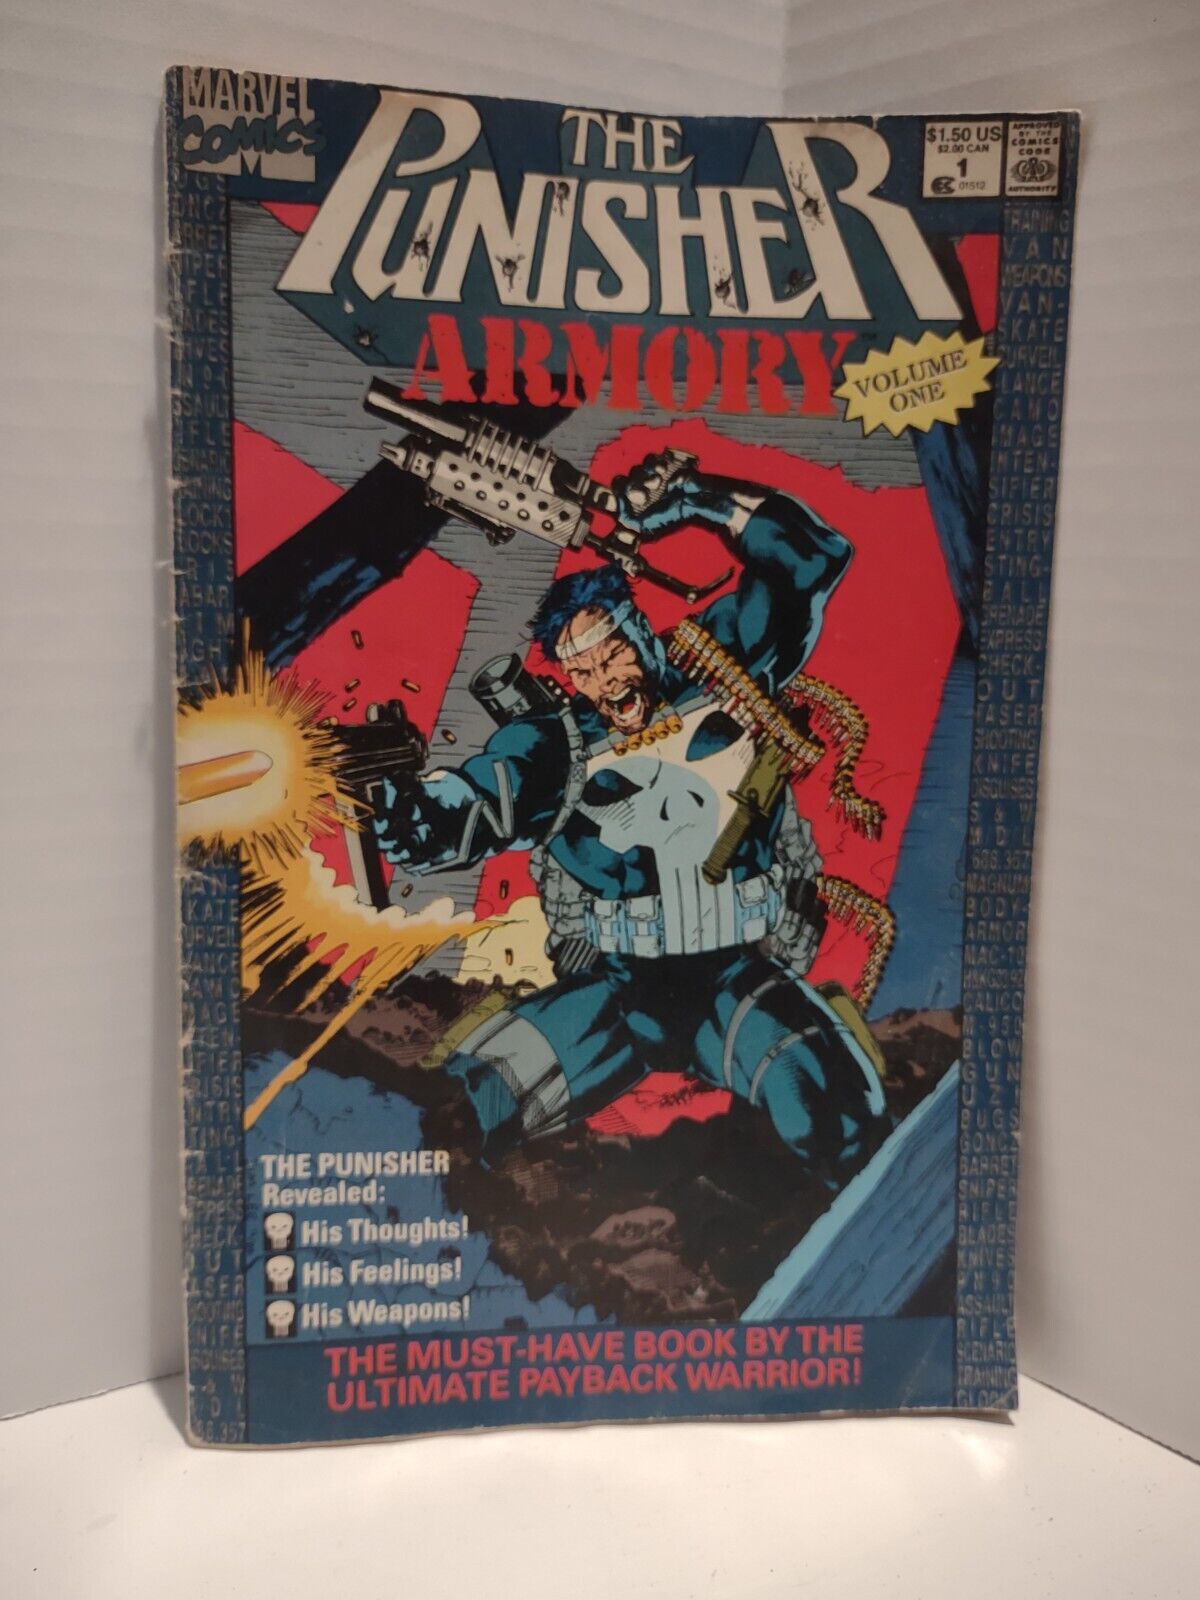 The Punisher Armory #1 May 1990 Marvel Comics Book Volume One Frank Castle